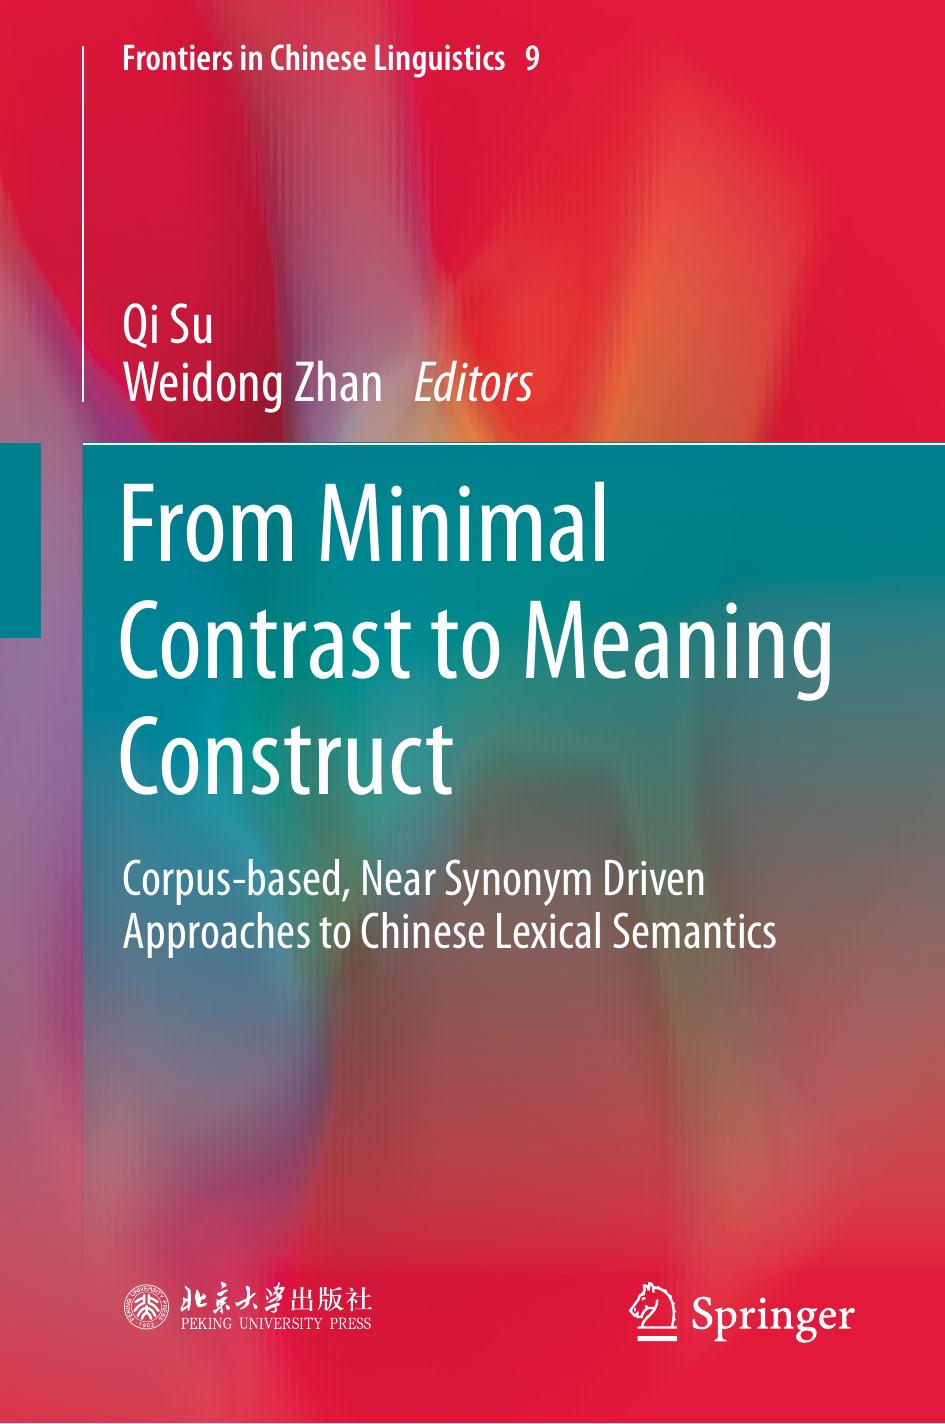 From Minimal Contrast to Meaning Construct: Corpus-Based, Near Synonym Driven Approaches to Chinese Lexical Semantics